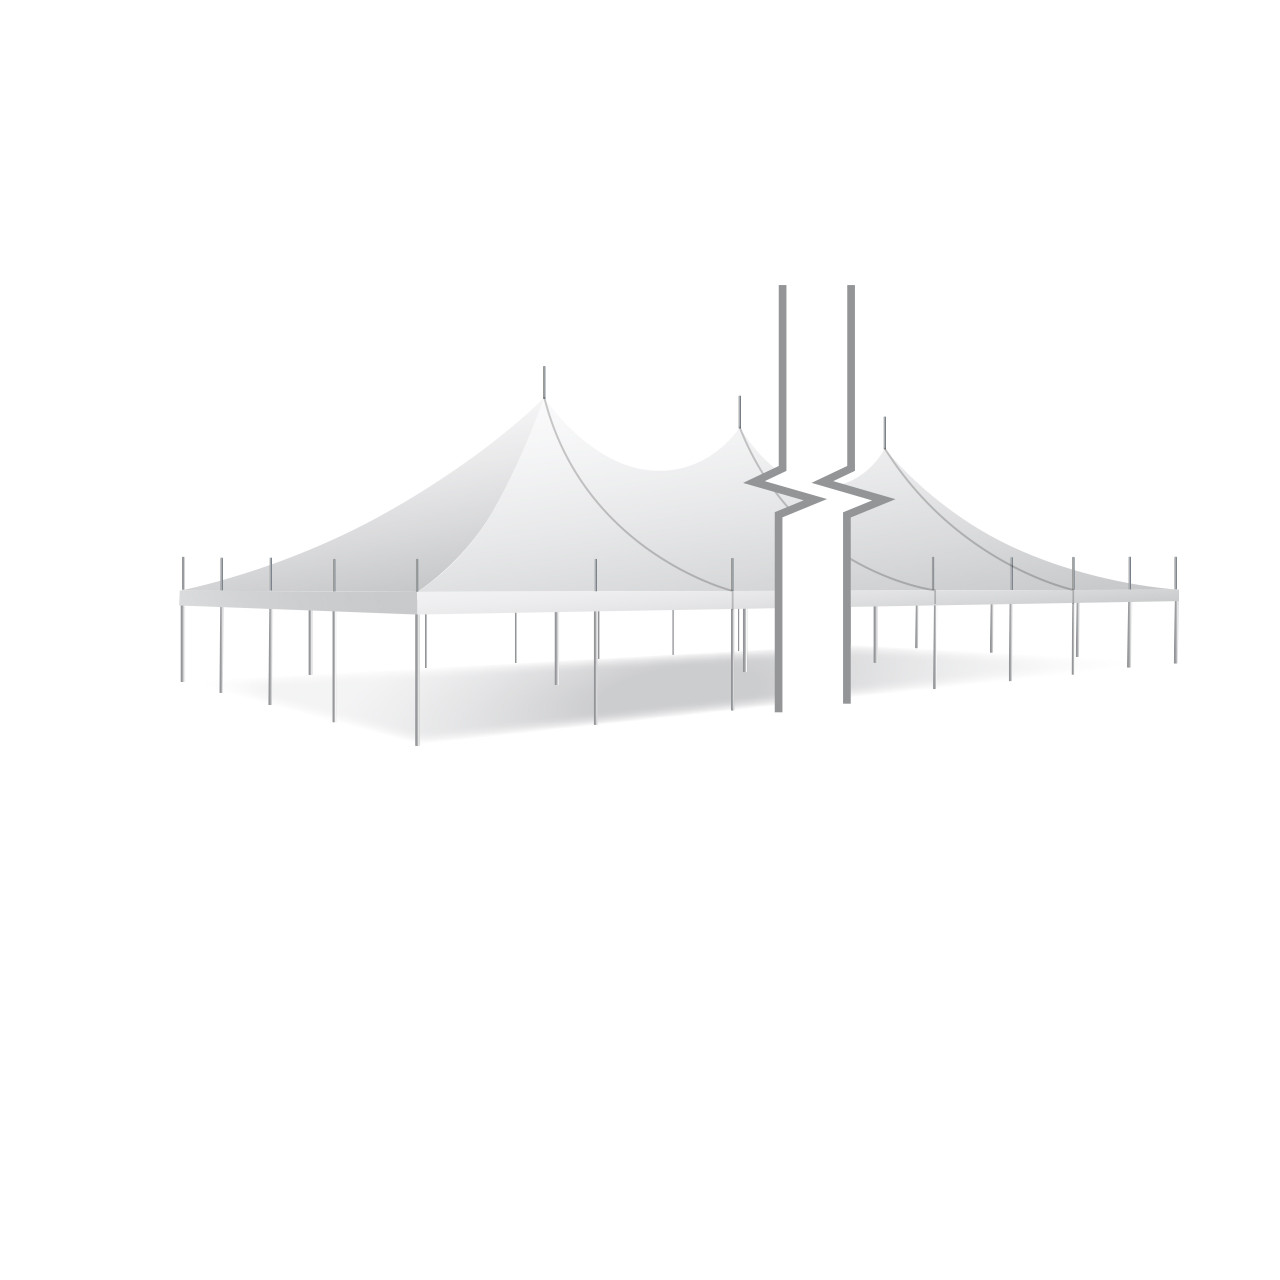 40' x 200' Premiere I Series High Peak Pole Tent, Sectional Tent Top, Complete